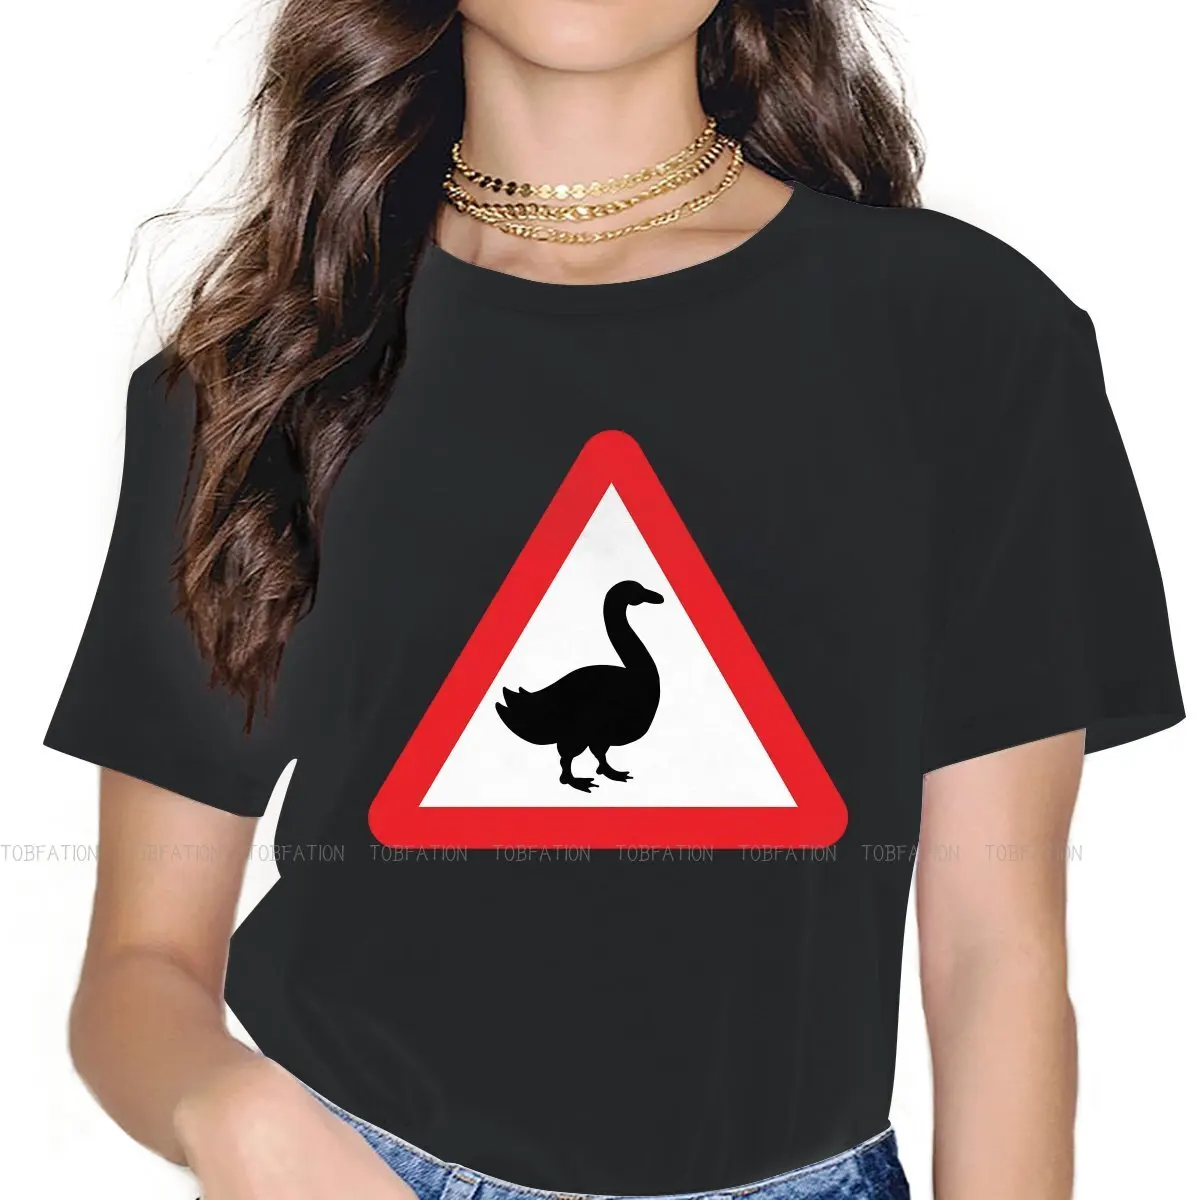 

Dangerous Women's T Shirt Untitled Goose Game Ladies Tees Kawaii O-neck Tops Graphic Tshirt 5XL Oversized Hipster